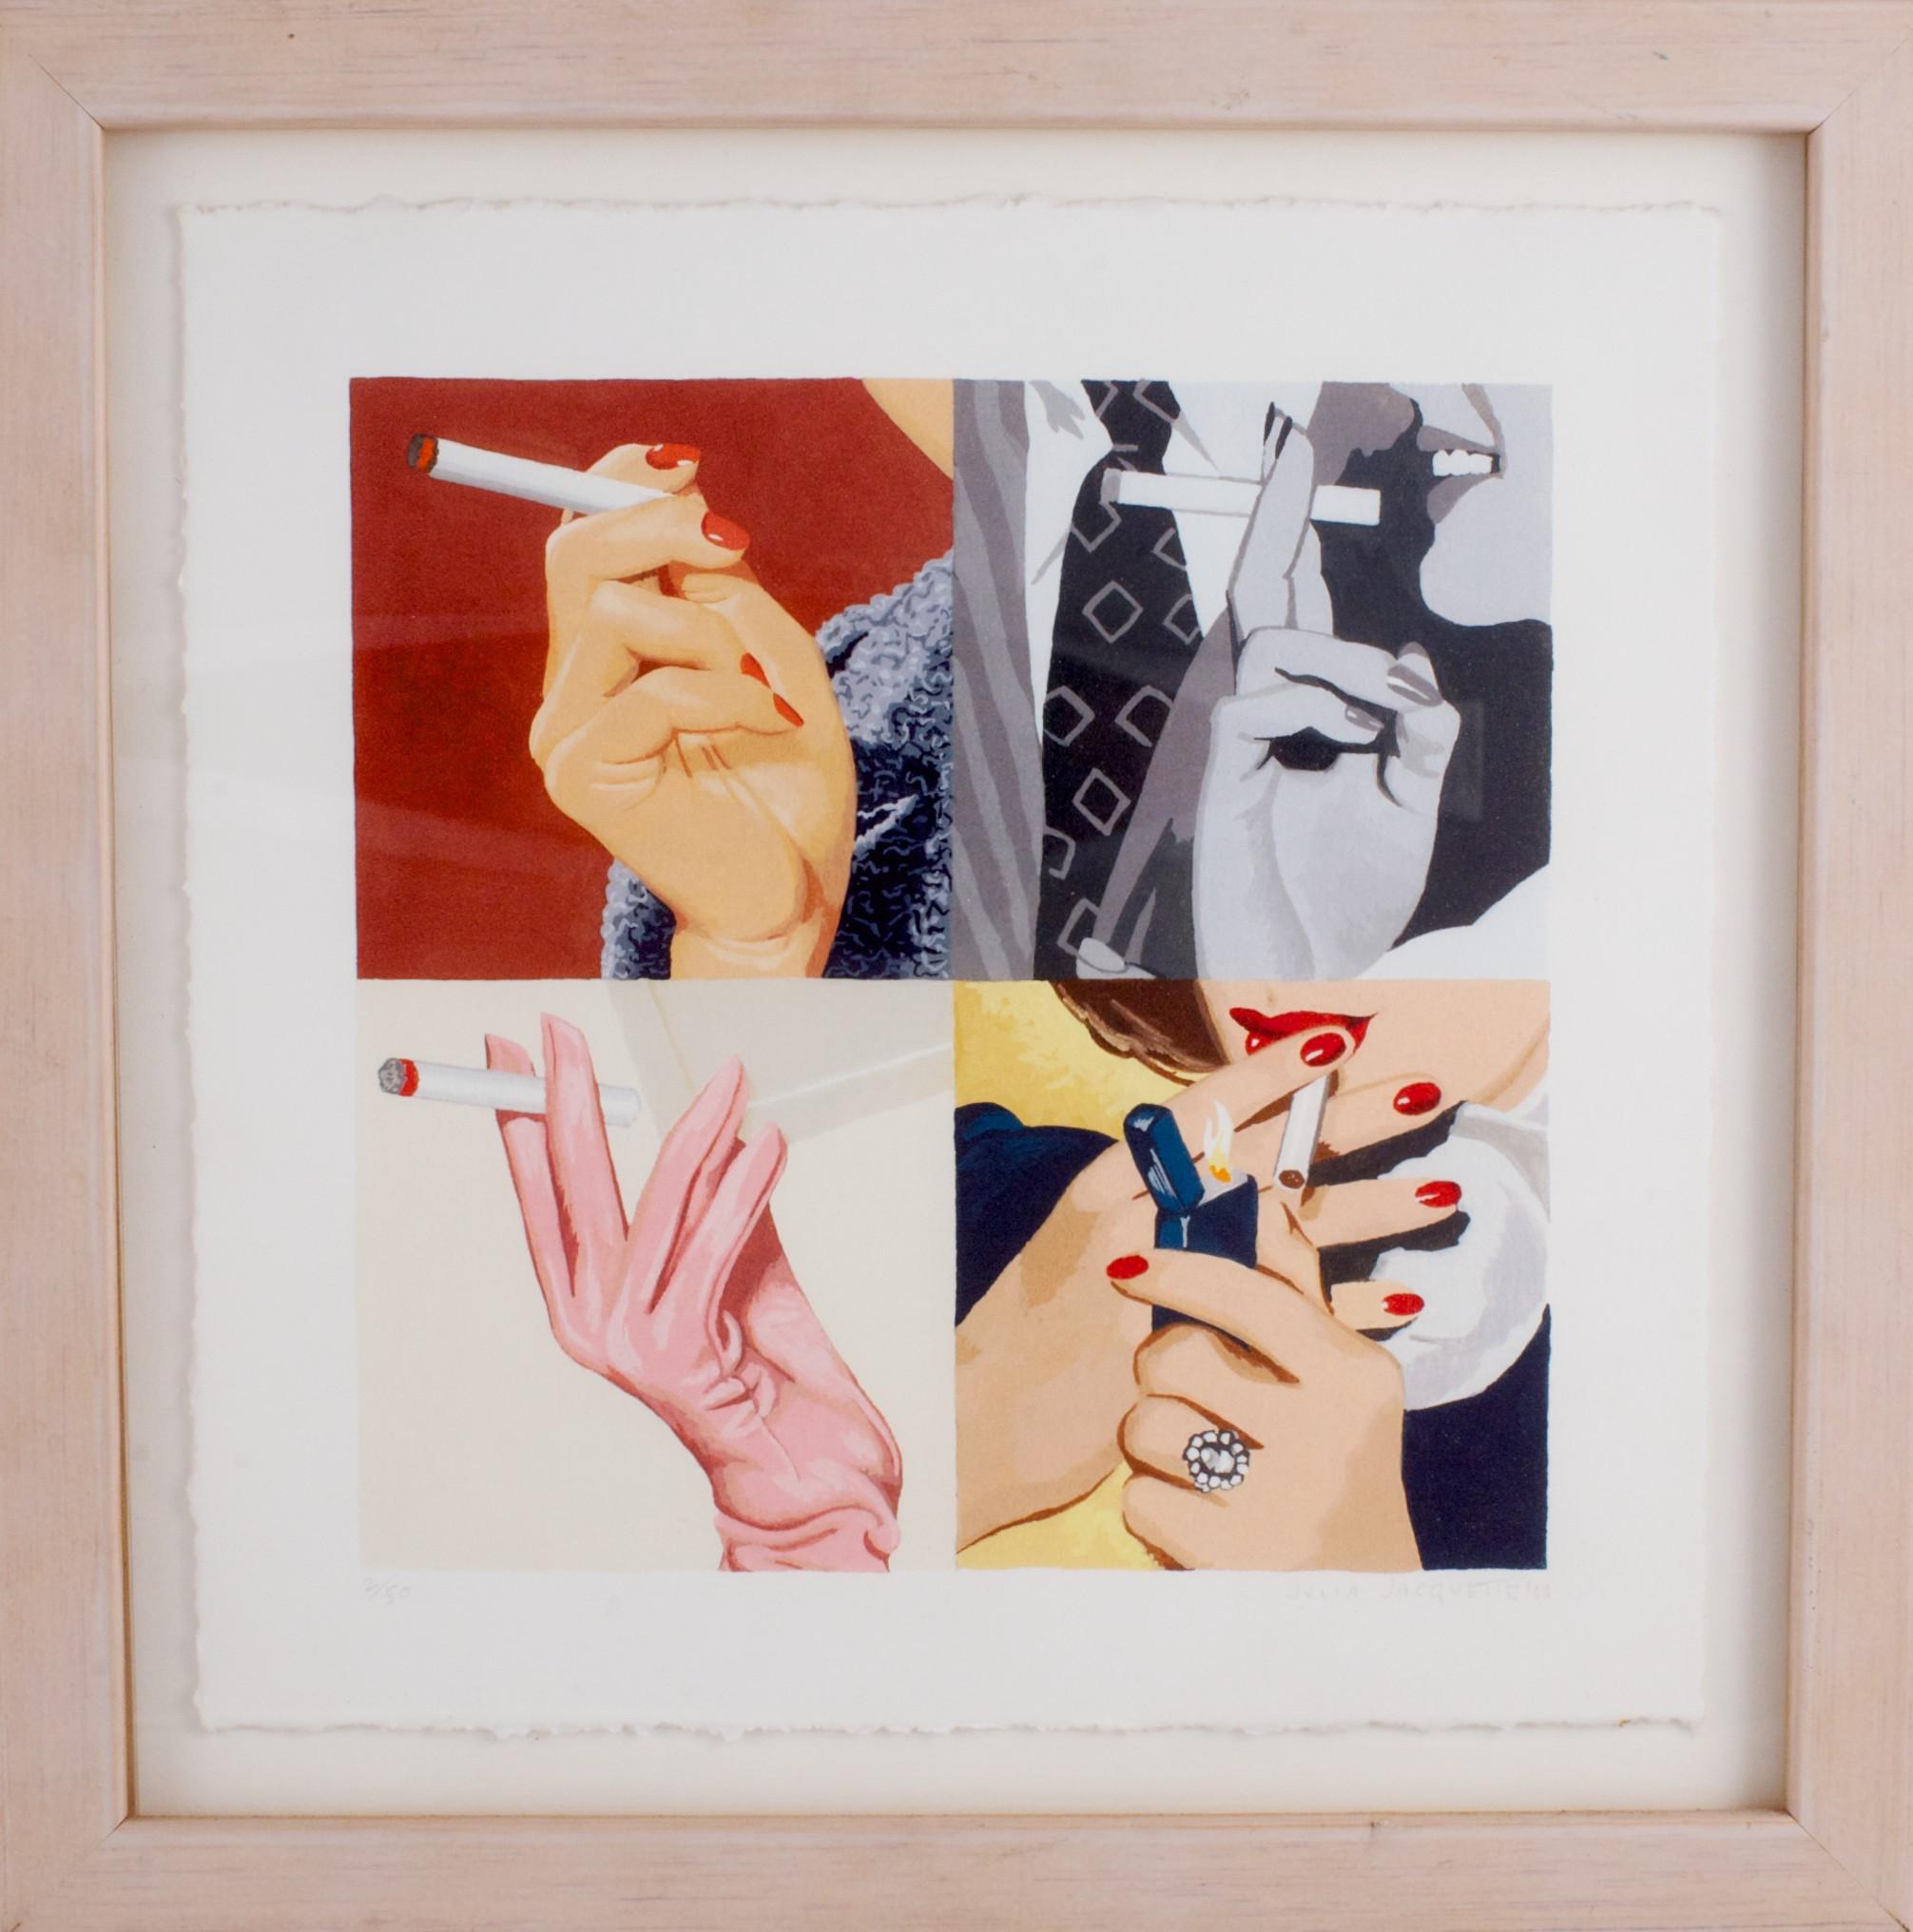 Classic four panel iris print 'Women's Hands, Smoking' 2000 from the Holly Solomon Gallery in an edition #2/ of 50 (LL) by Julia Jacquette (pencil signed (LR)

Print Sz: 9" x 9"

Frame Sz: 11 1/2" x 11 1/2"

Julia Jacquette (born 1964) is an